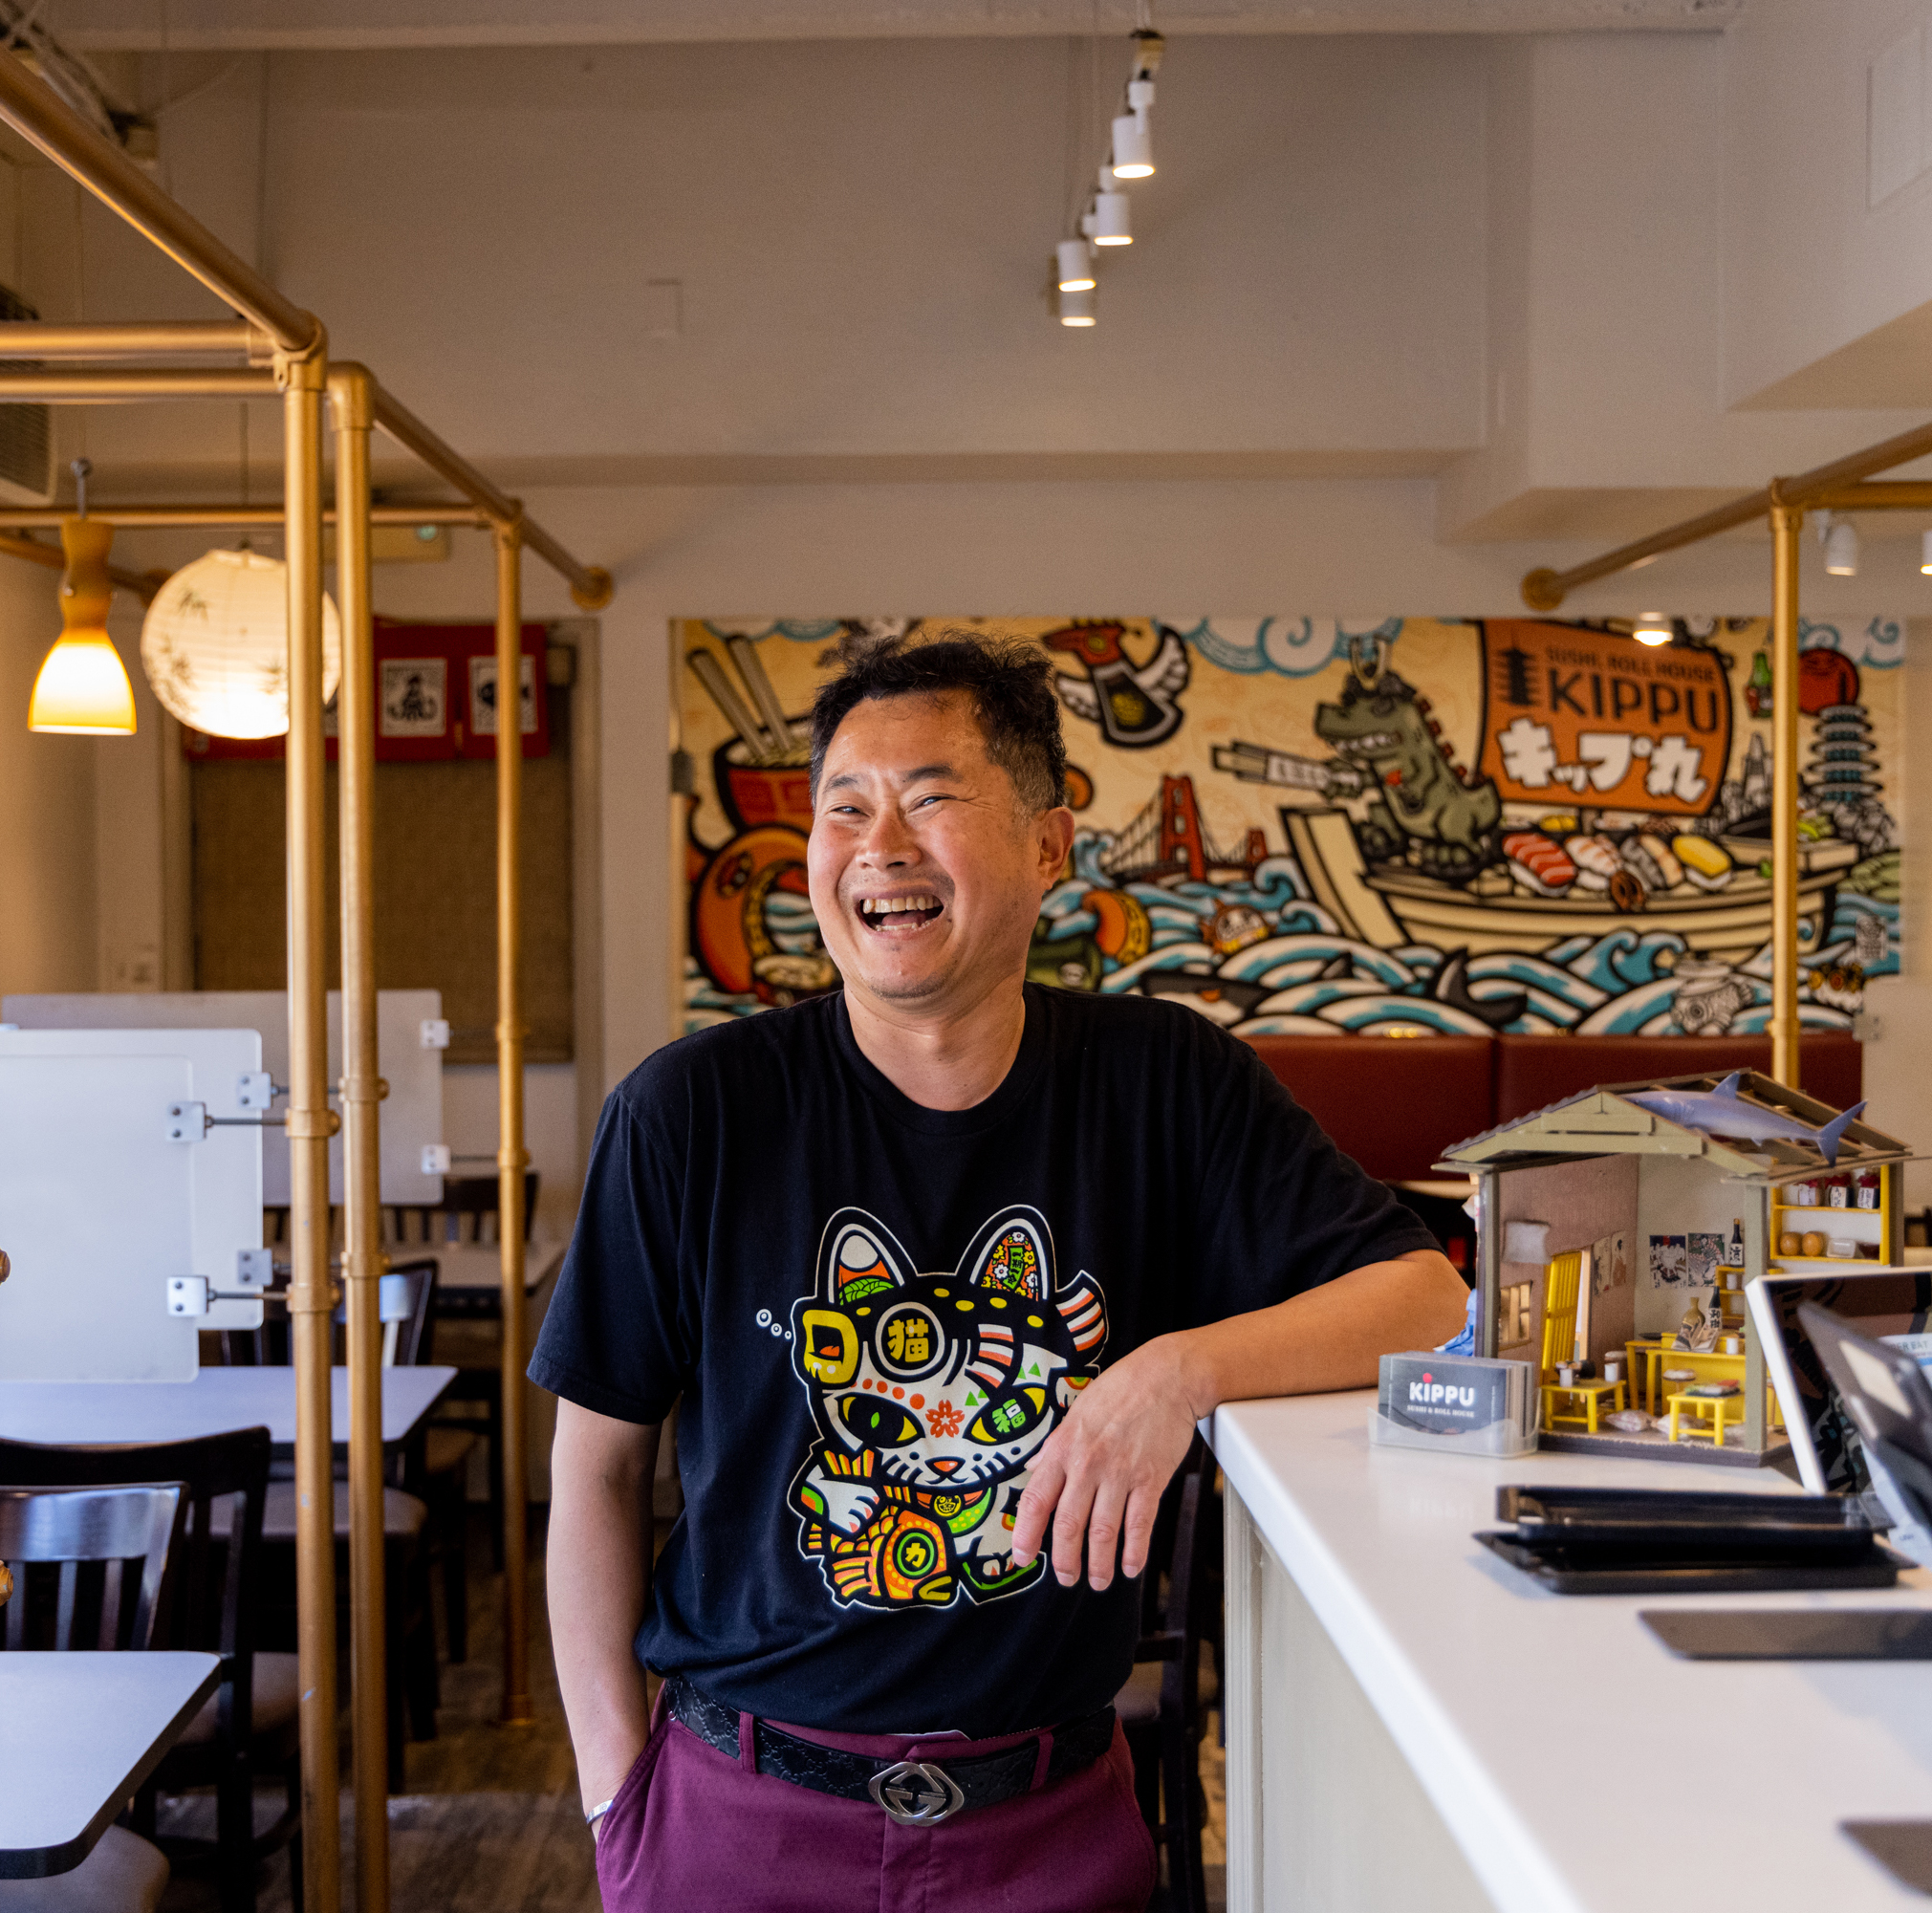 A cheerful man in a black graphic t-shirt stands in a vibrant, colorful restaurant with Japanese-themed decor and murals, smiling broadly.